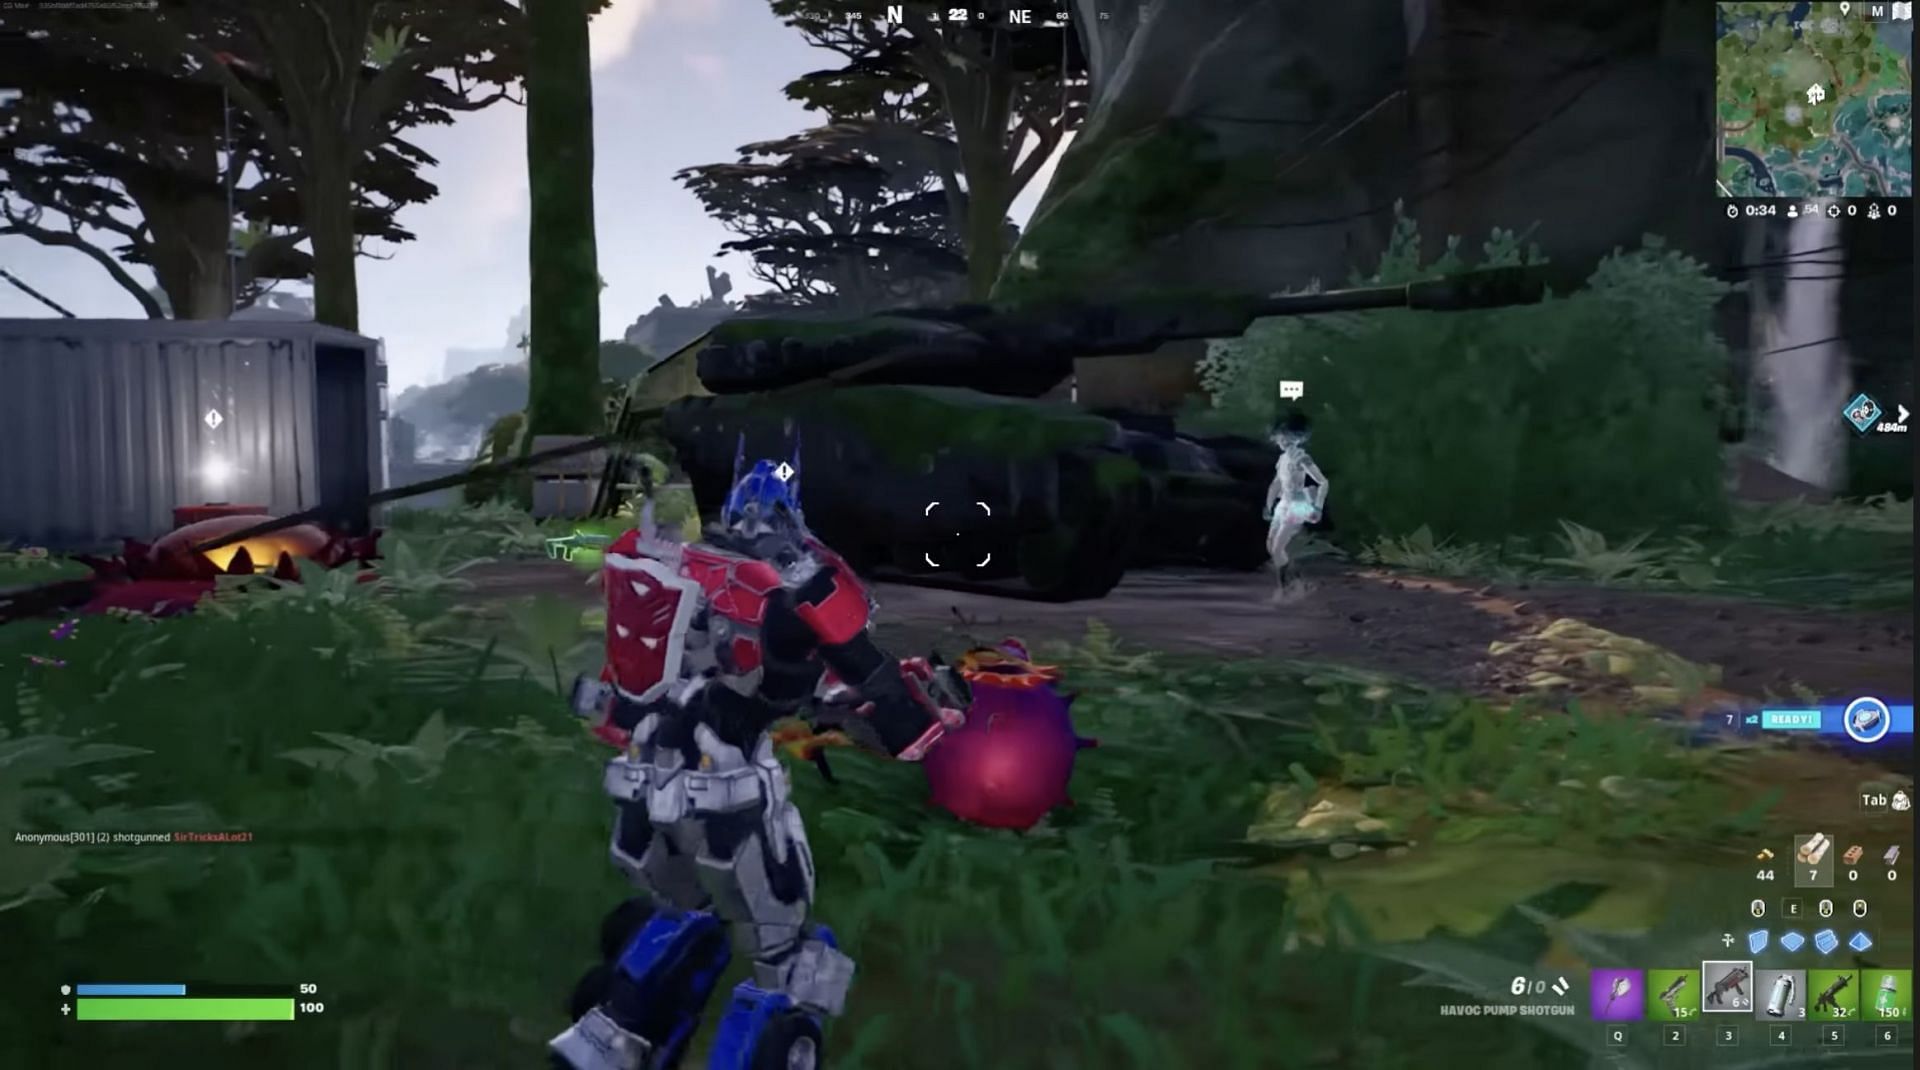 Slone&#039;s tank is back on the island (Image via CommunicGaming on YouTube)